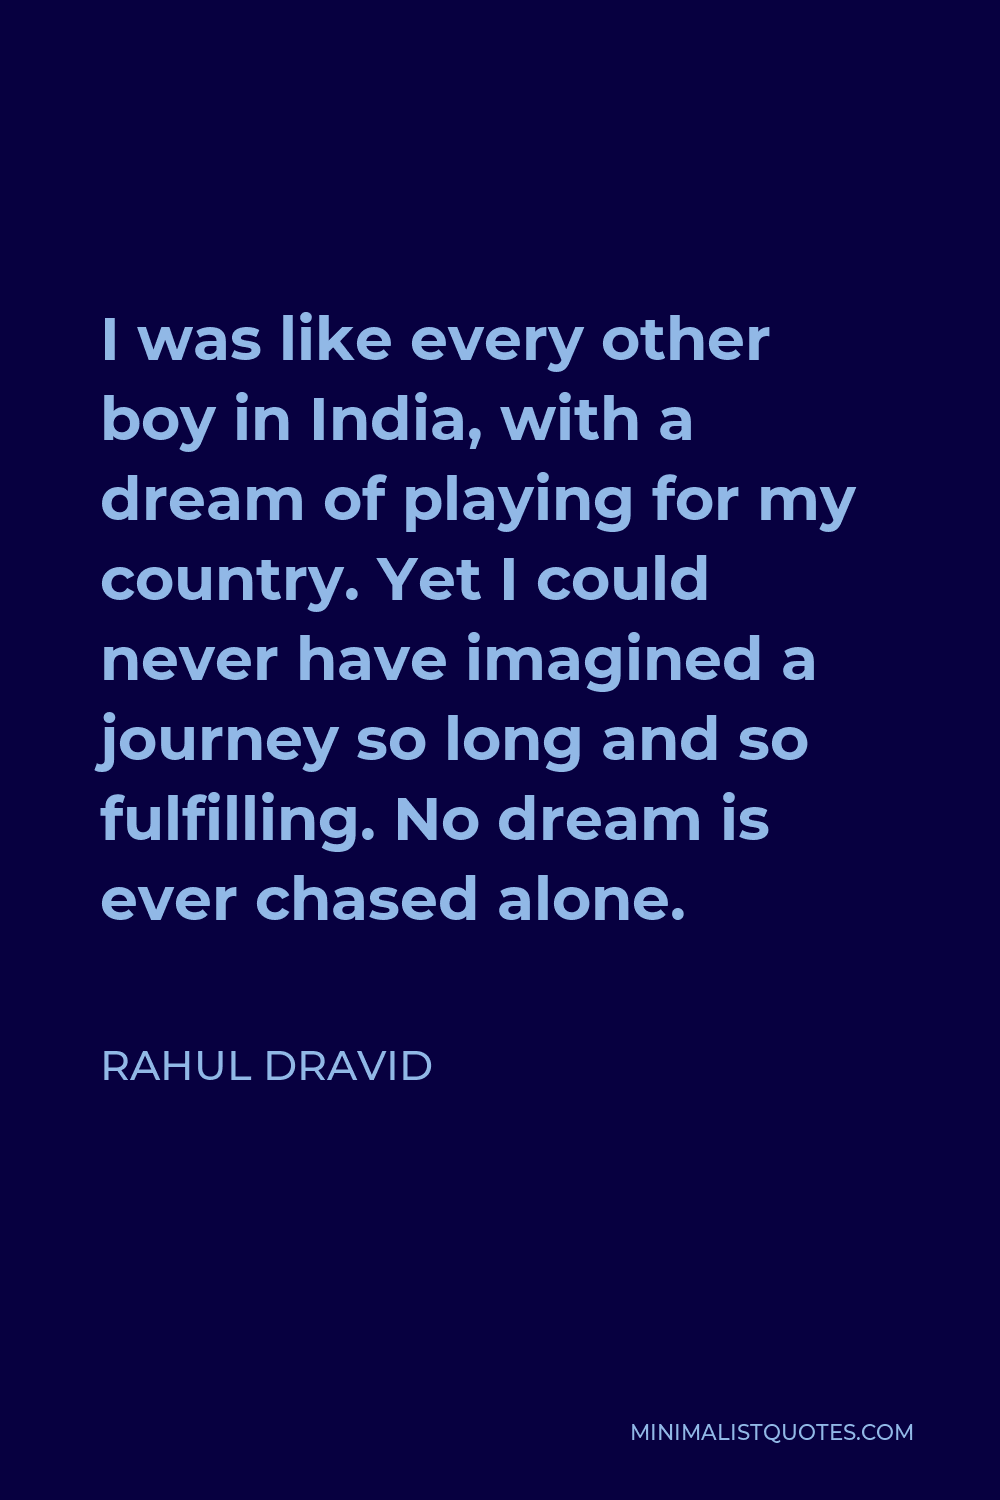 Rahul Dravid Quote - I was like every other boy in India, with a dream of playing for my country. Yet I could never have imagined a journey so long and so fulfilling. No dream is ever chased alone.